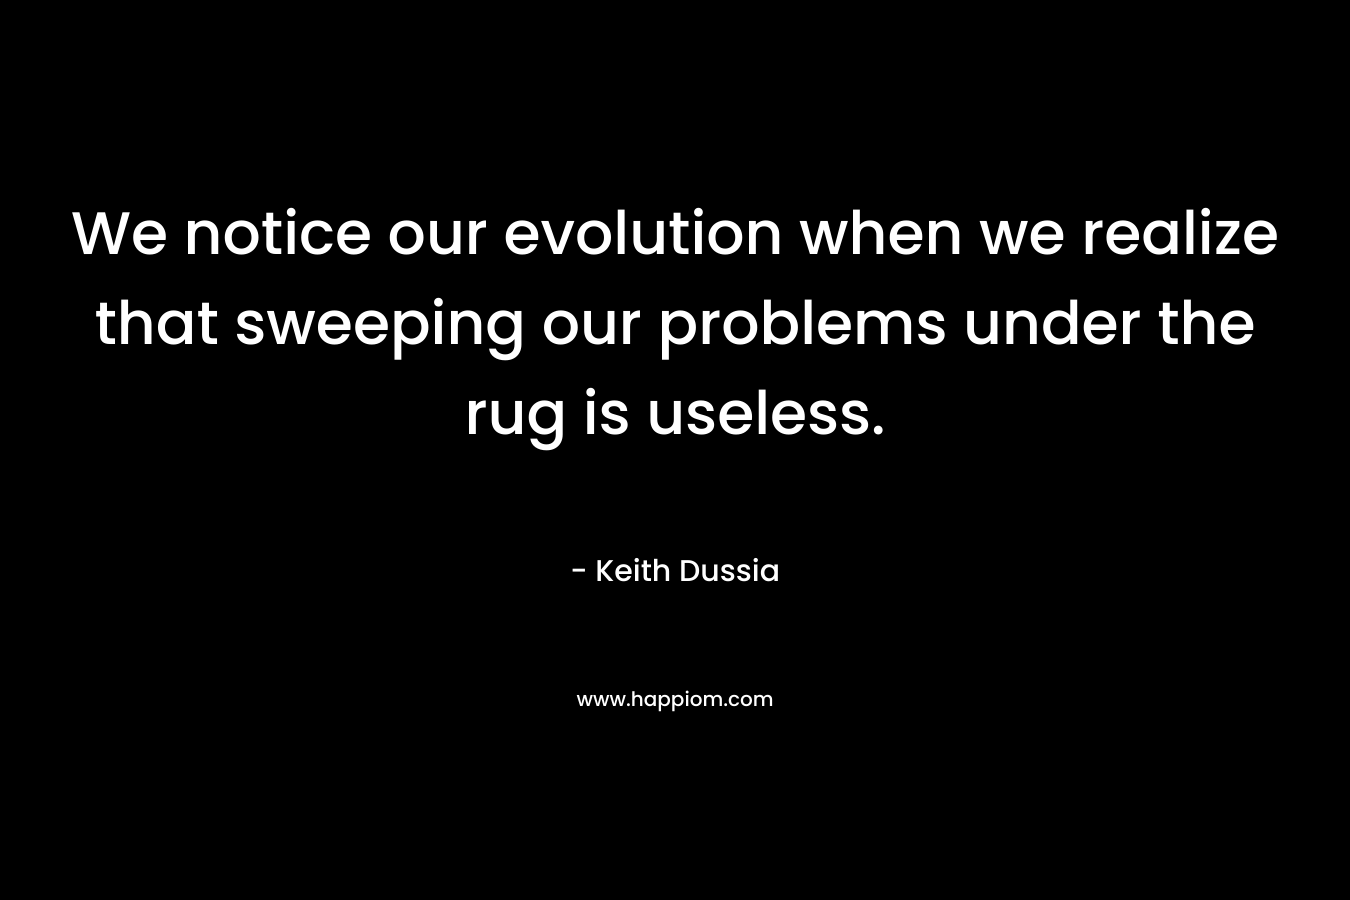 We notice our evolution when we realize that sweeping our problems under the rug is useless. – Keith Dussia